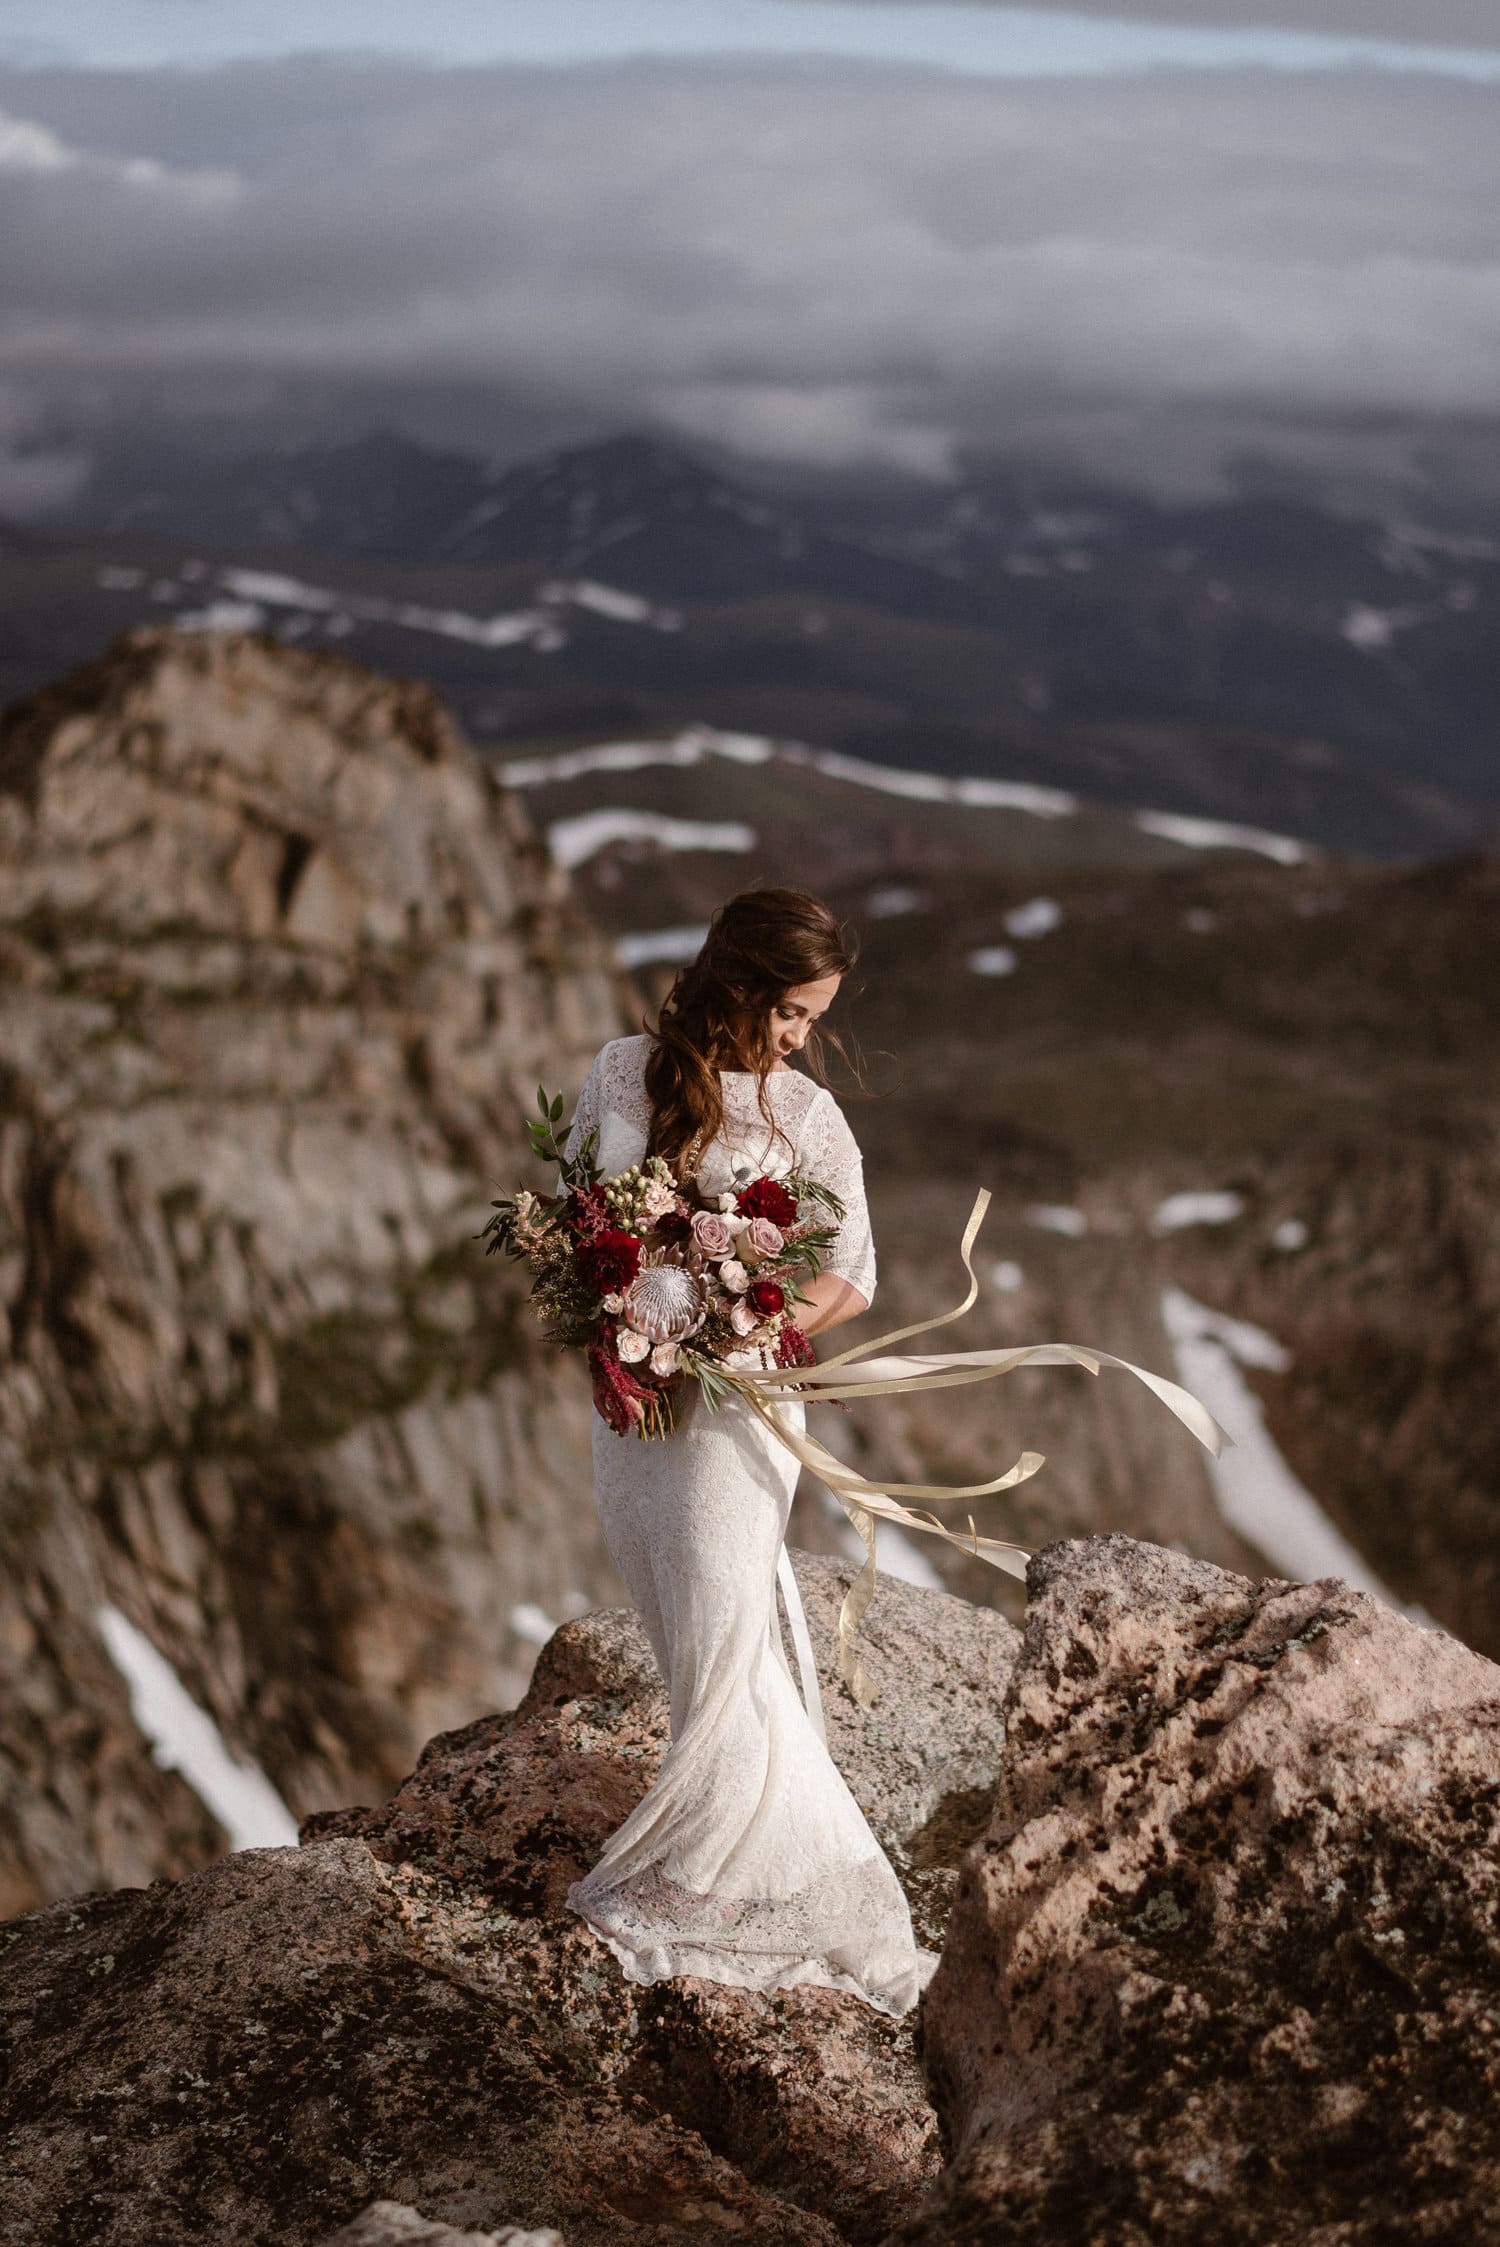 Bride standing on a rocky cliff and looking down. She is wearing a white dress, and holding a bouquet with ribbons flowing in the wind. 